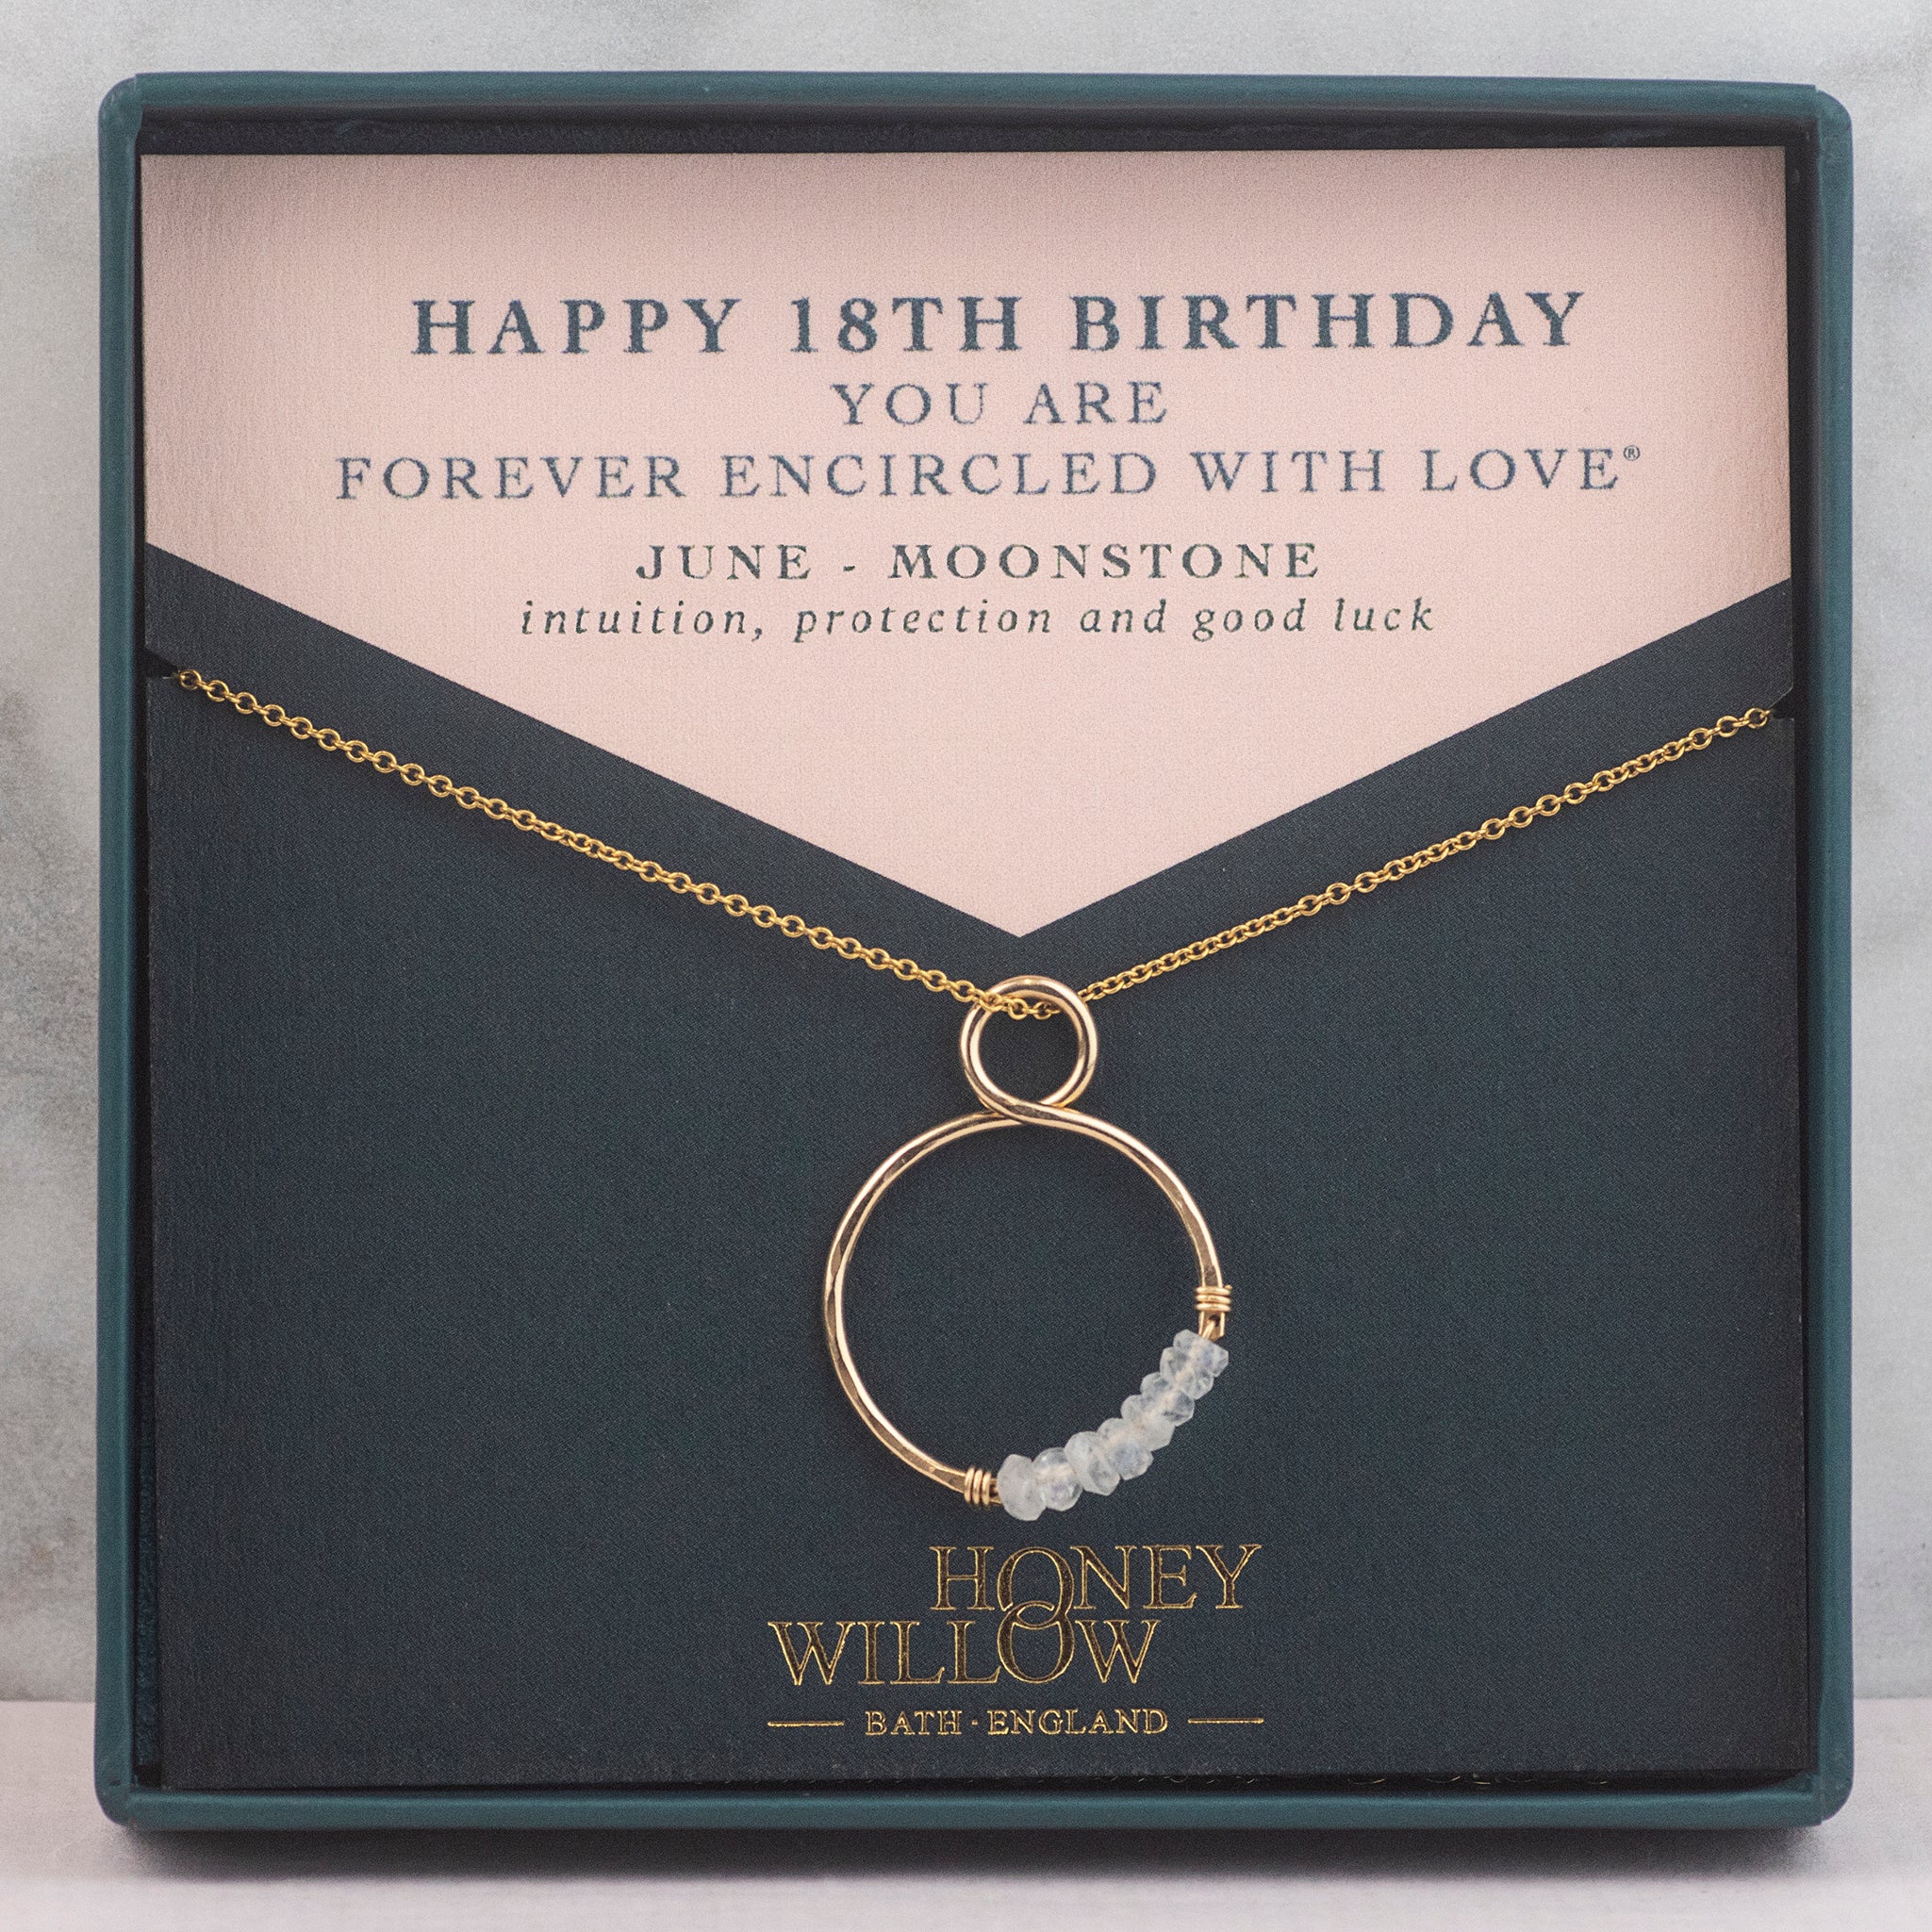 18th birthday pendant necklace OFF 53% |Newest